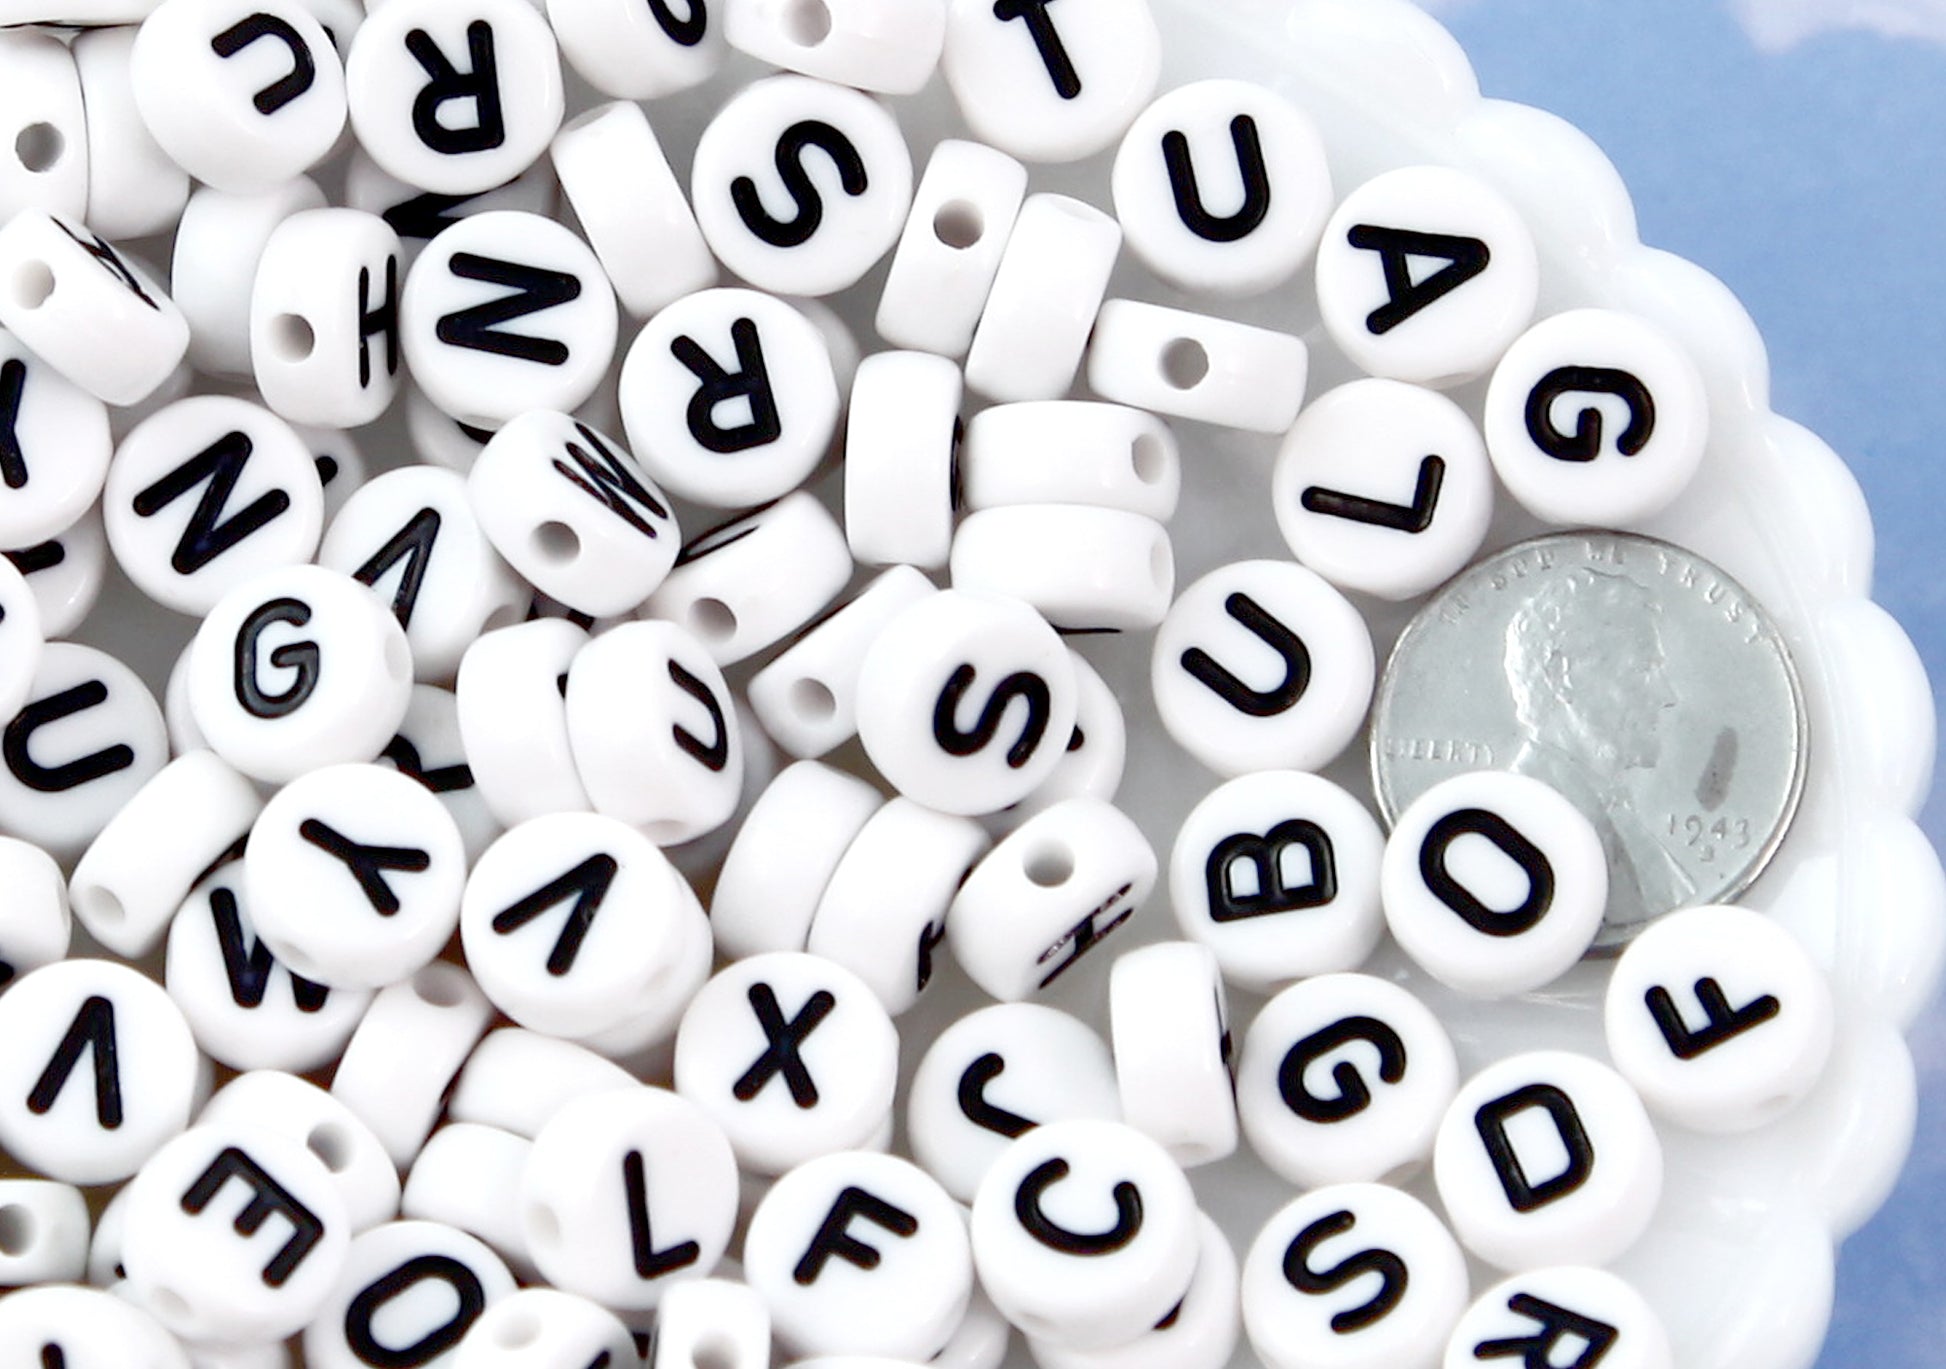 Plastic Beads Alphabet Isolated On A White Background Stock Photo -  Download Image Now - iStock